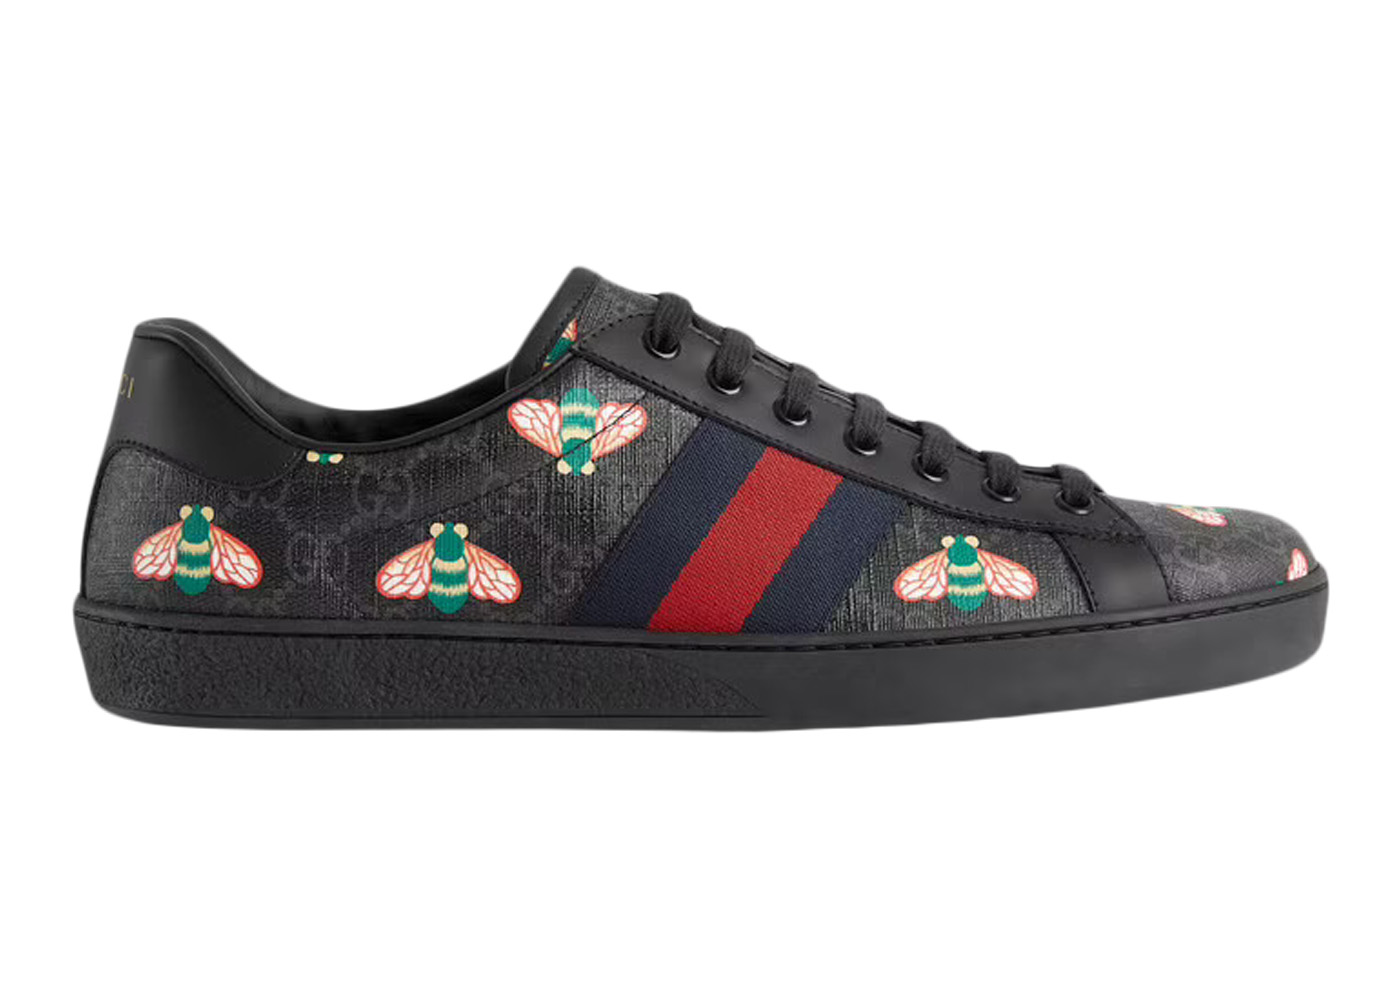 Gucci Ace Bee (Women's) - 431942 A38G0 9064/‎431942 02JP0 9064 - US